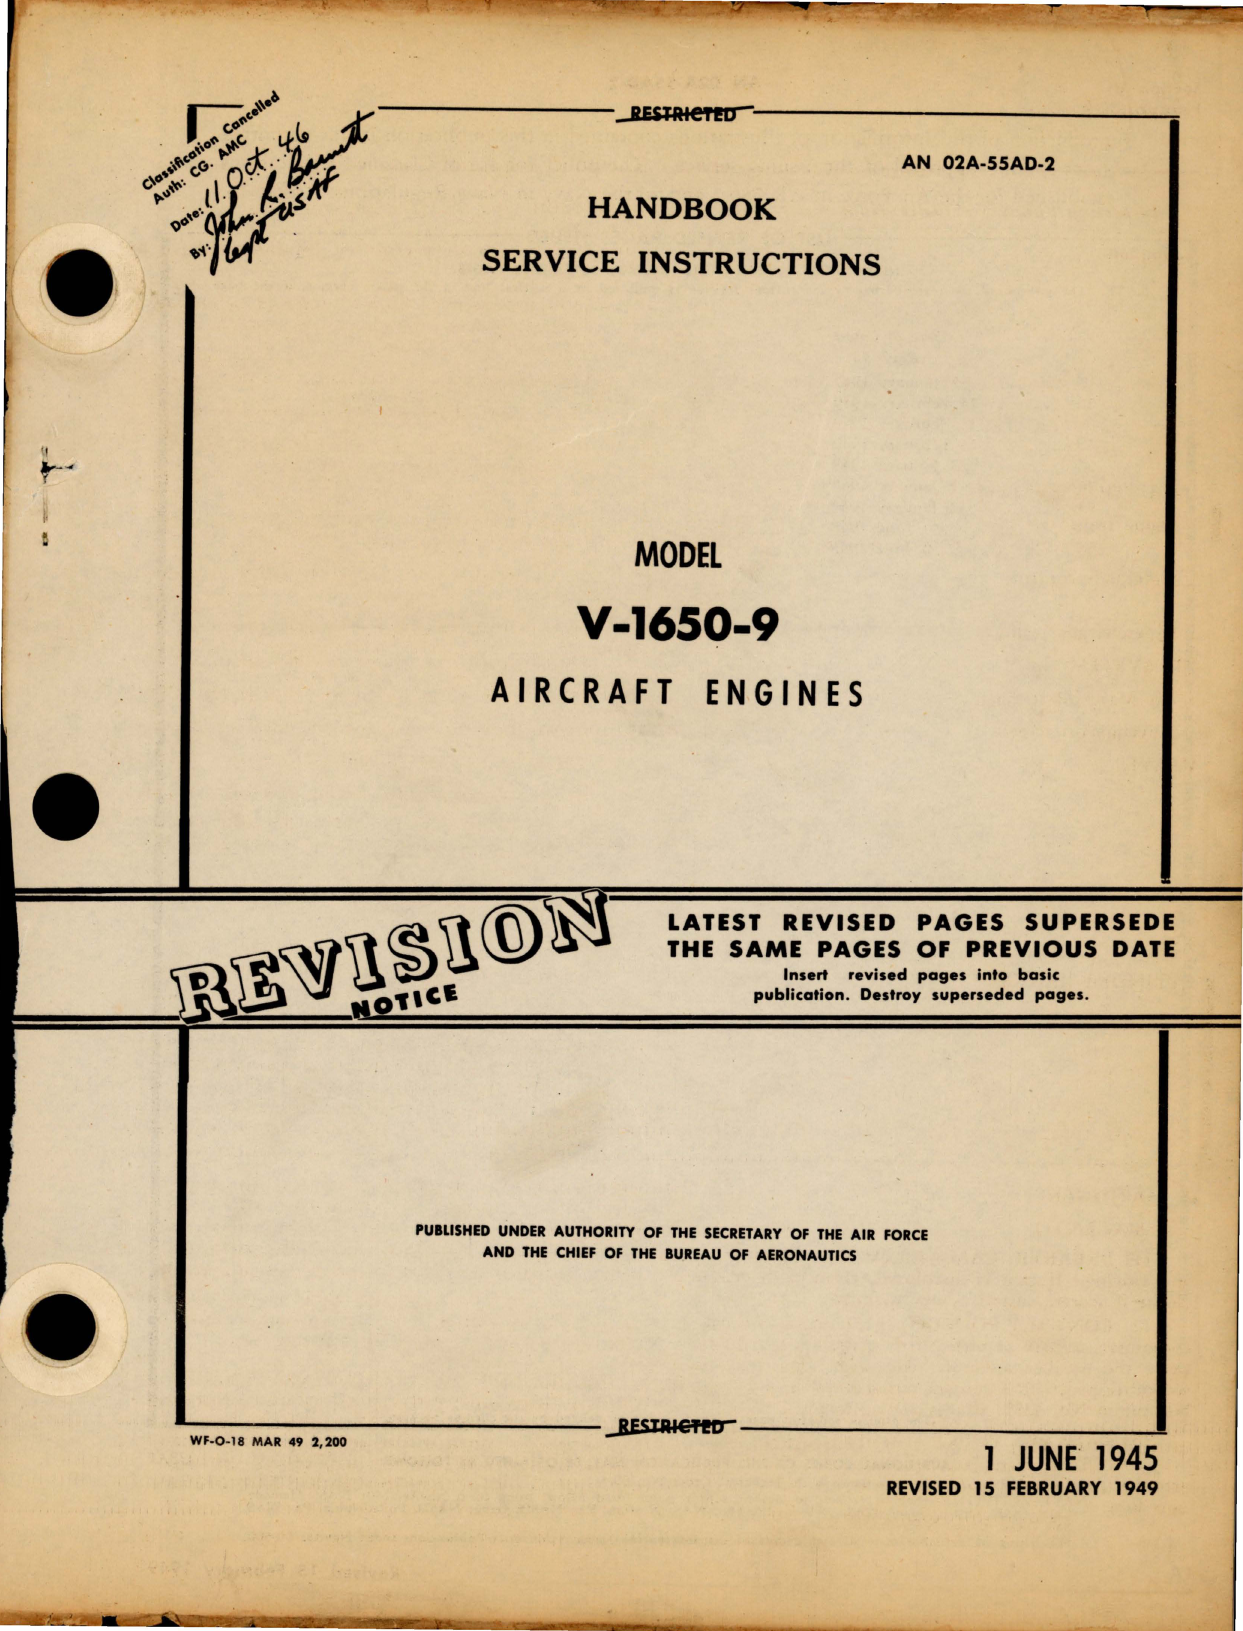 Sample page 1 from AirCorps Library document: Service Instructions for V-1650-9 Aircraft Engines